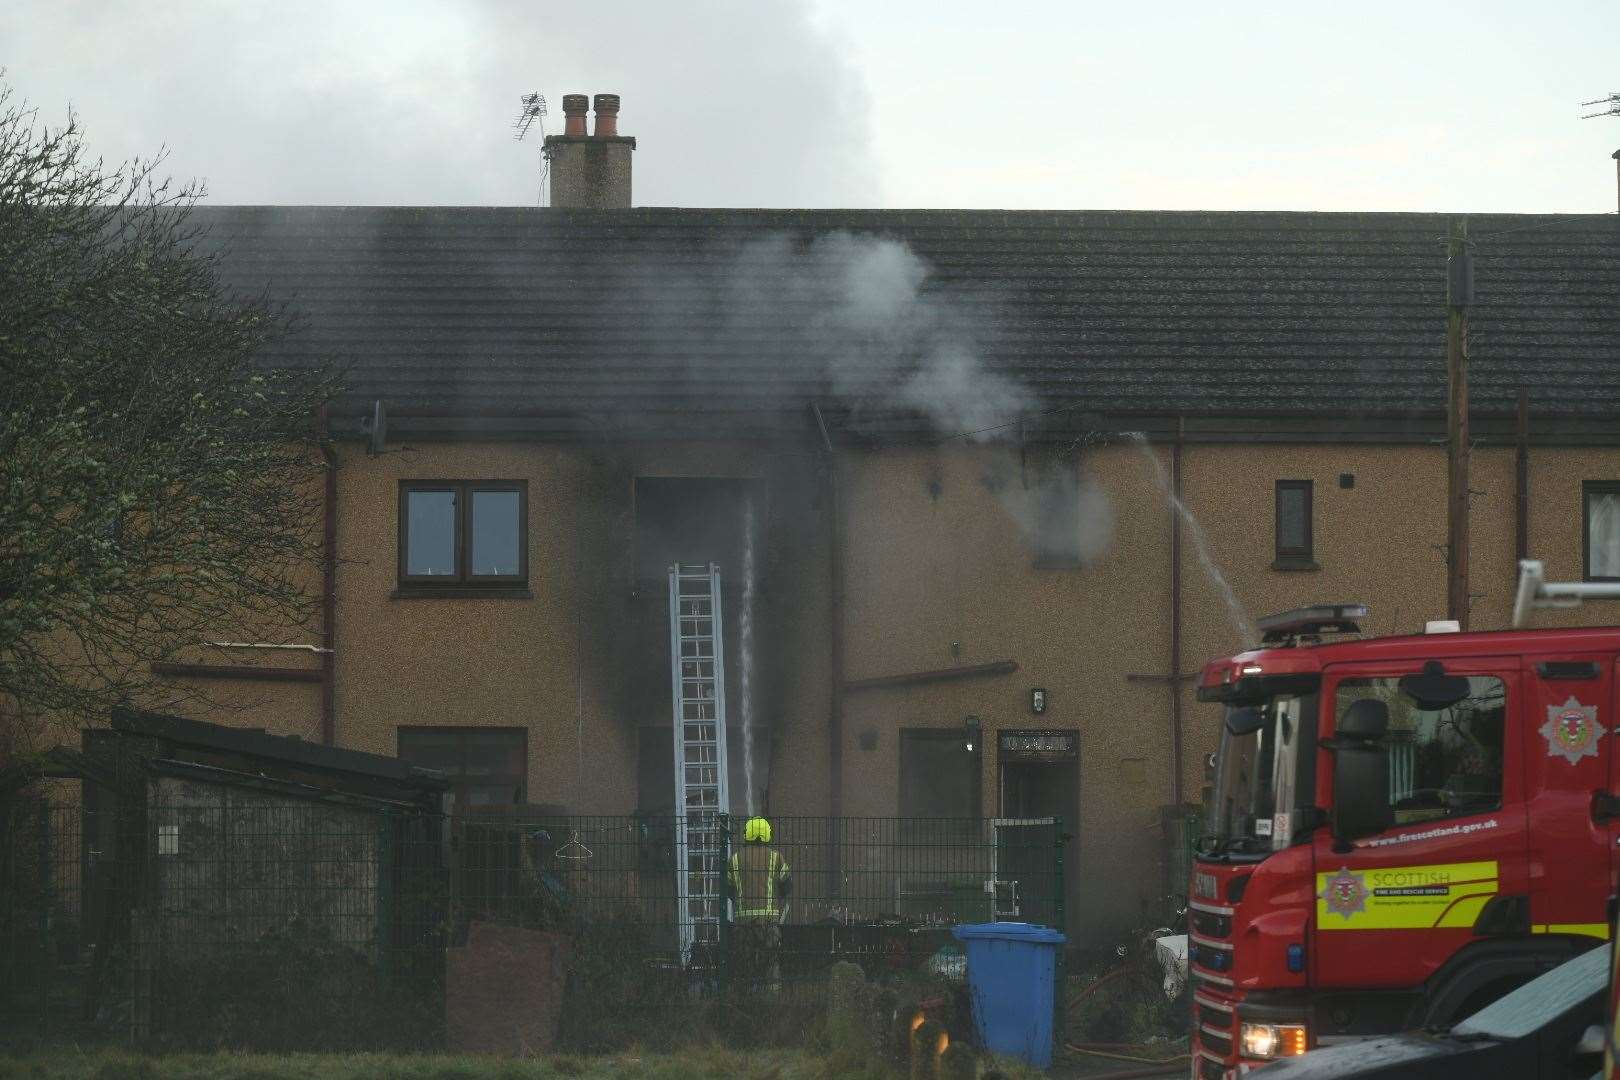 John ‘Boy’ MacPhee lost everything in the fire at St Valery Avenue, Dalneigh.